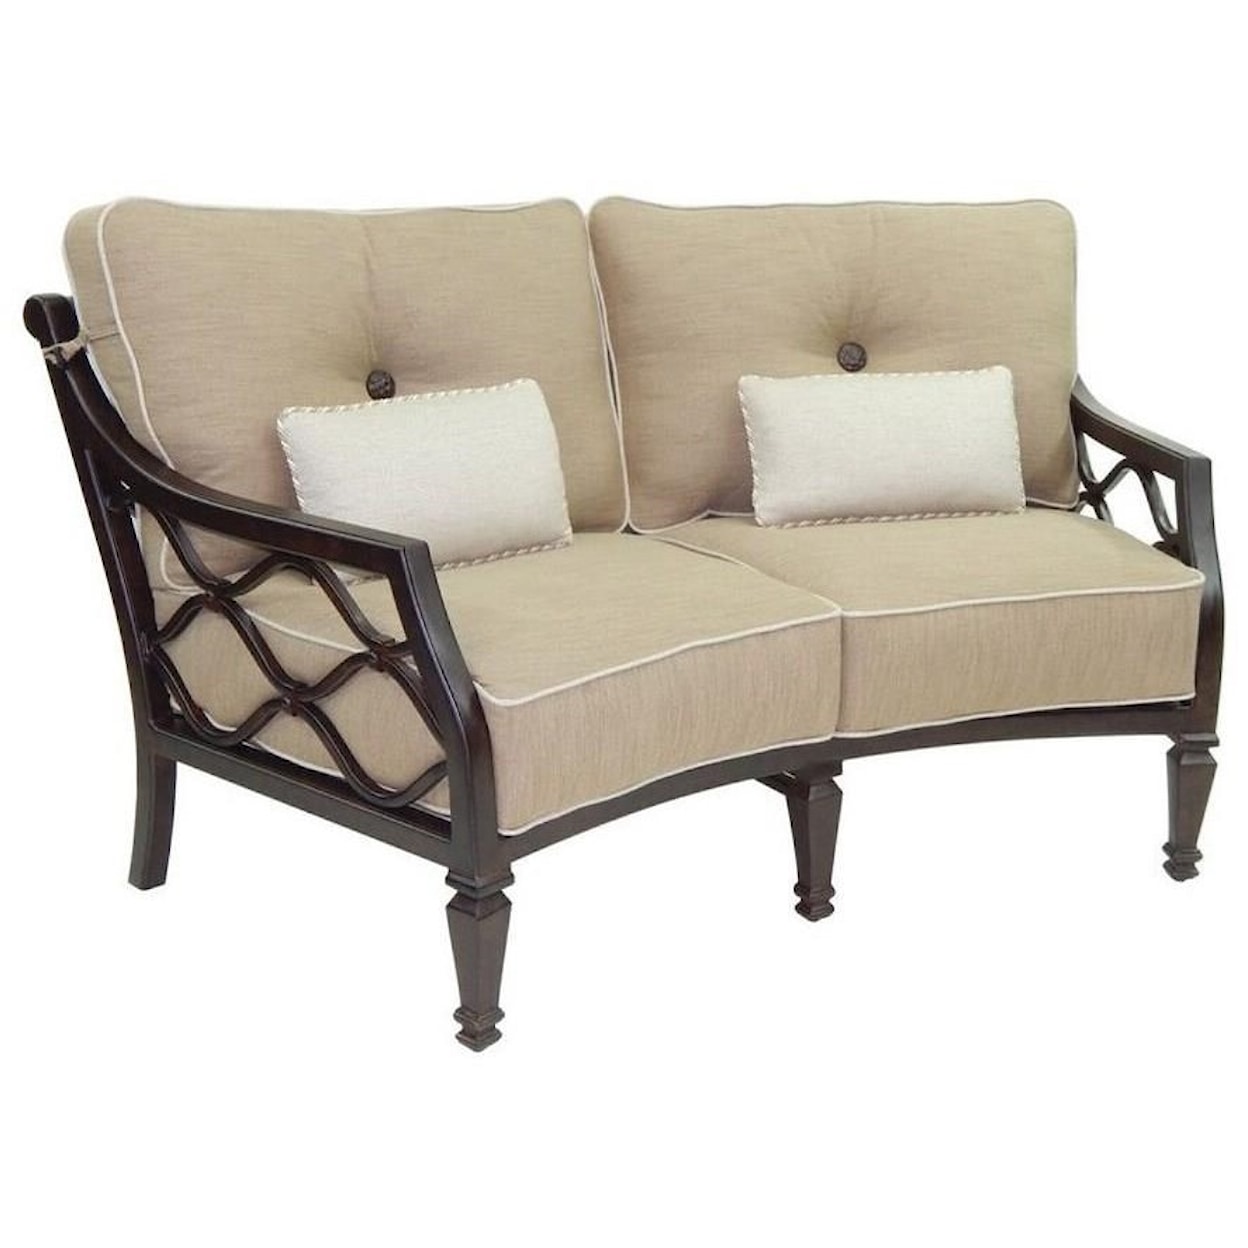 Castelle by Pride Family Brands Villa Bianca Cushioned Crescent Loveseat w/ Two Kidney Pi